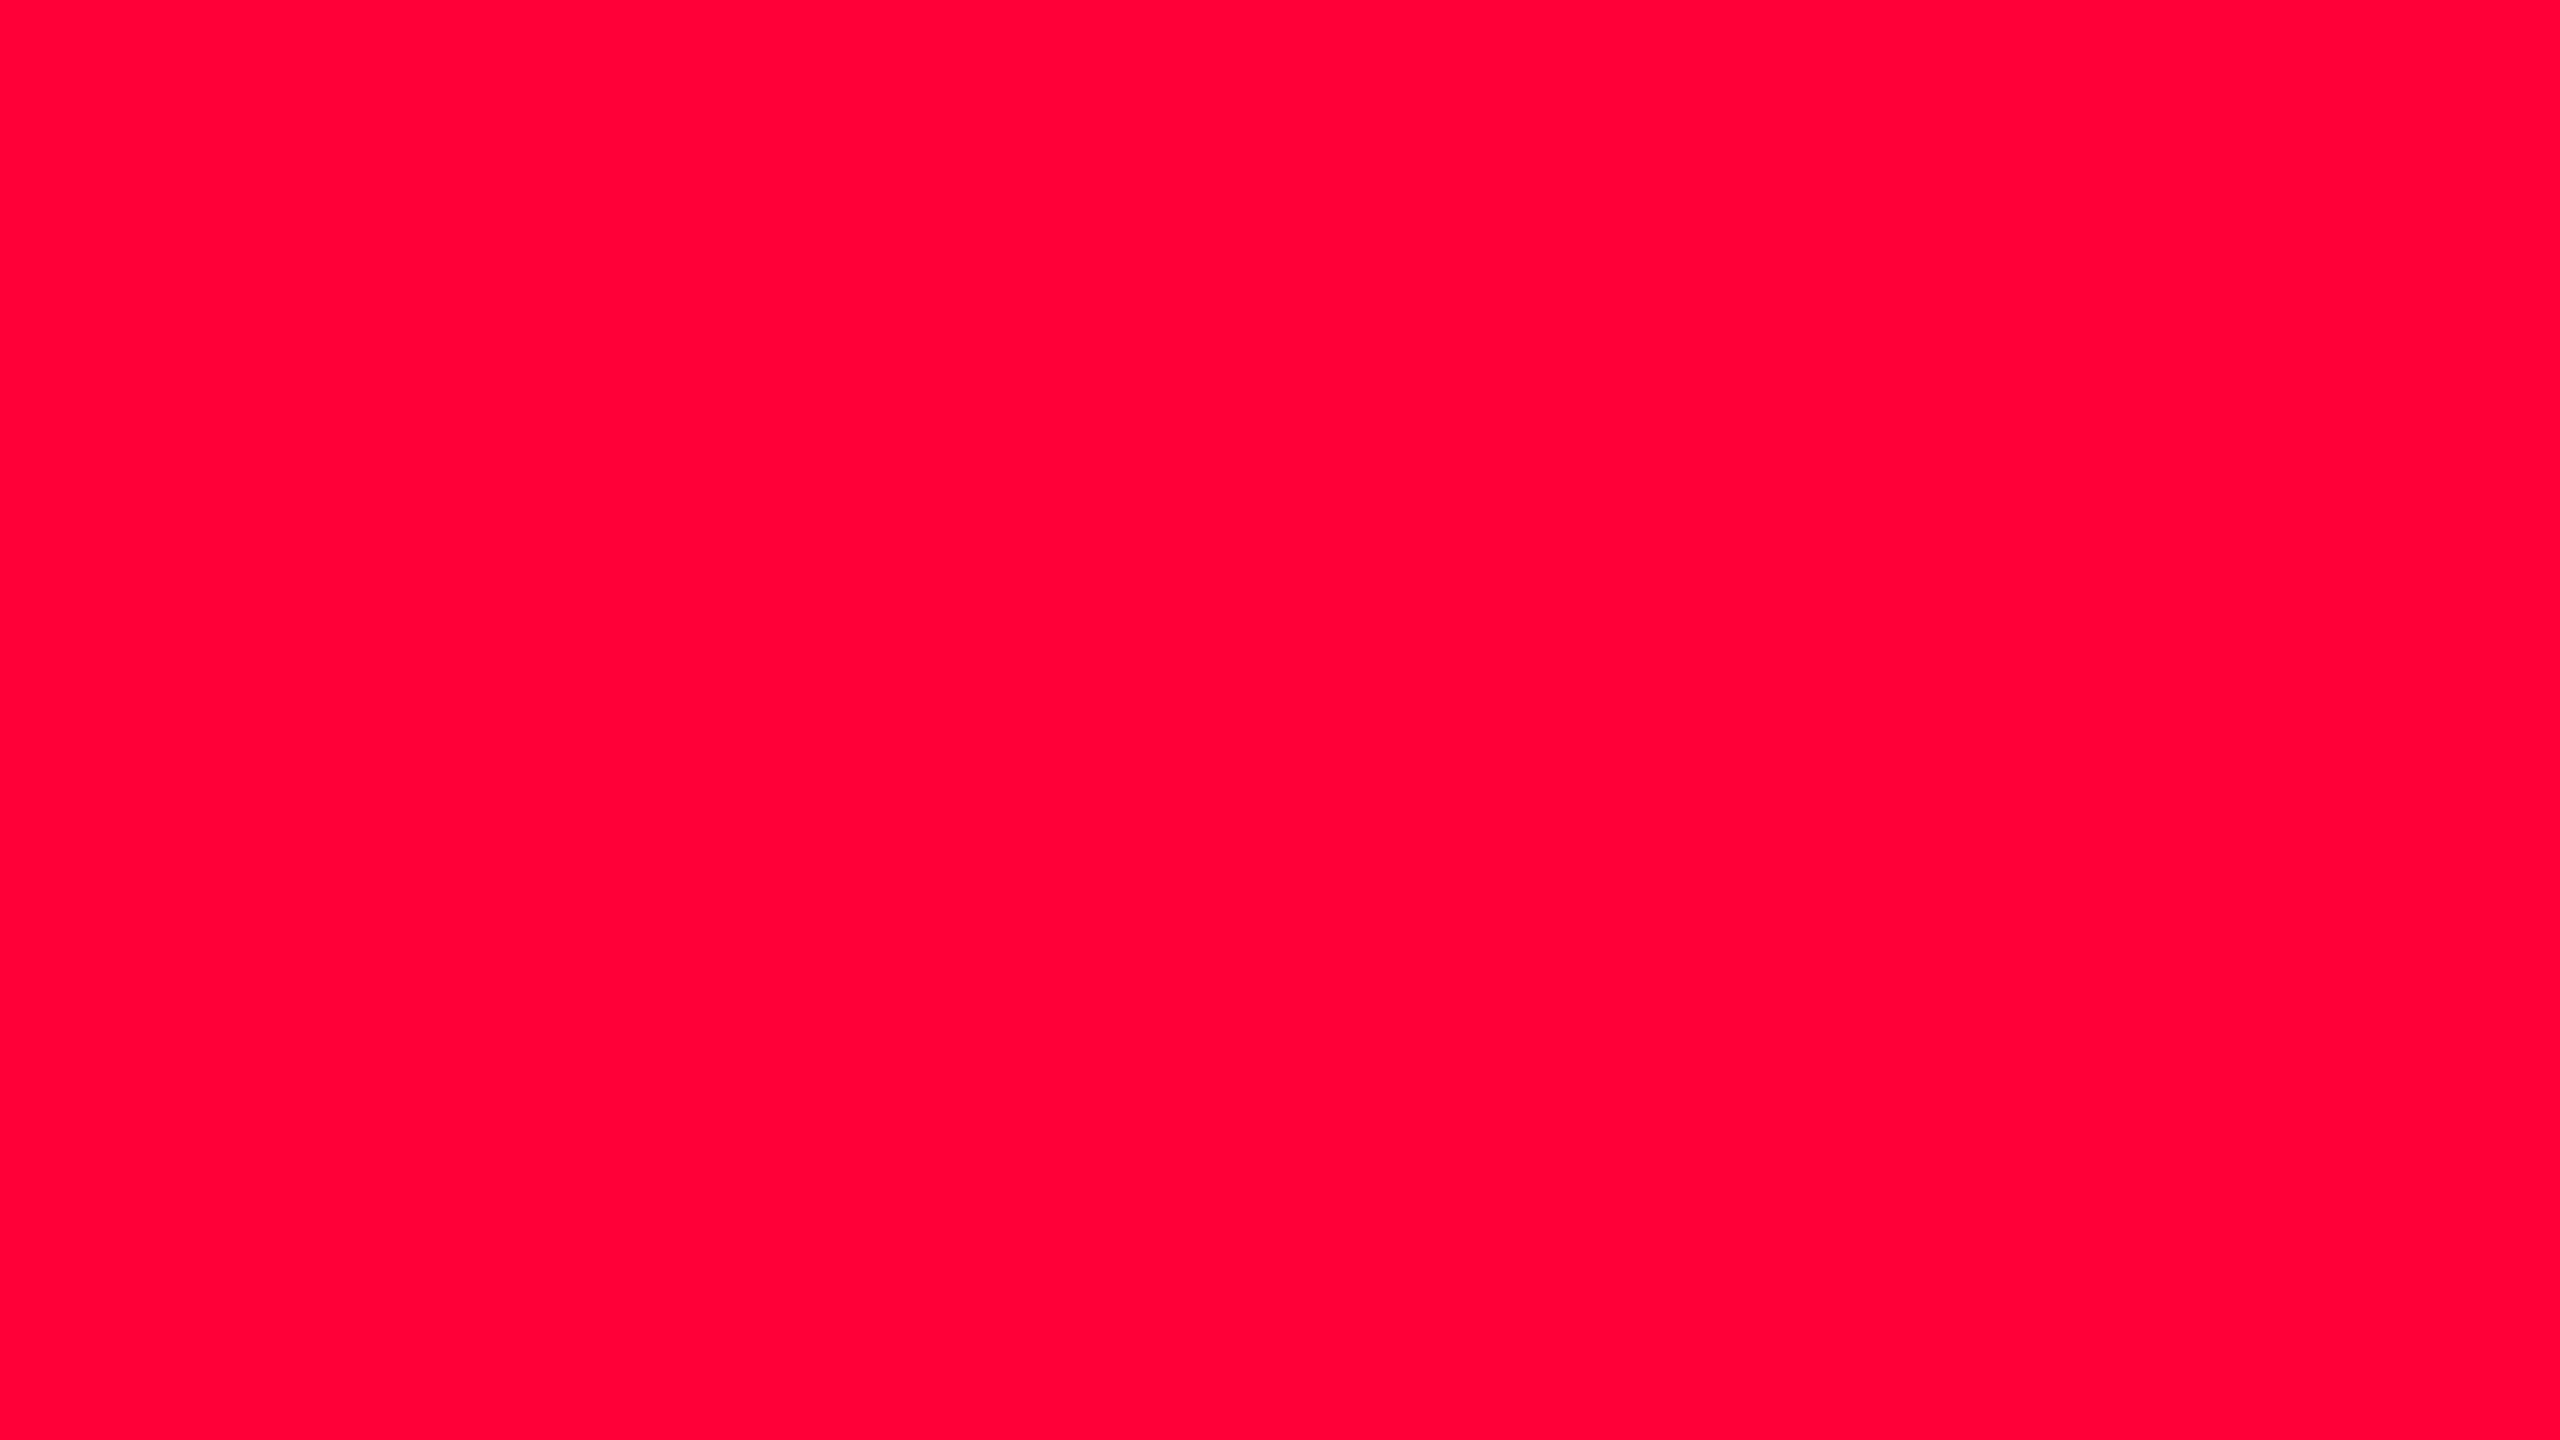 2560x1440 Carmine Red Solid Color Background